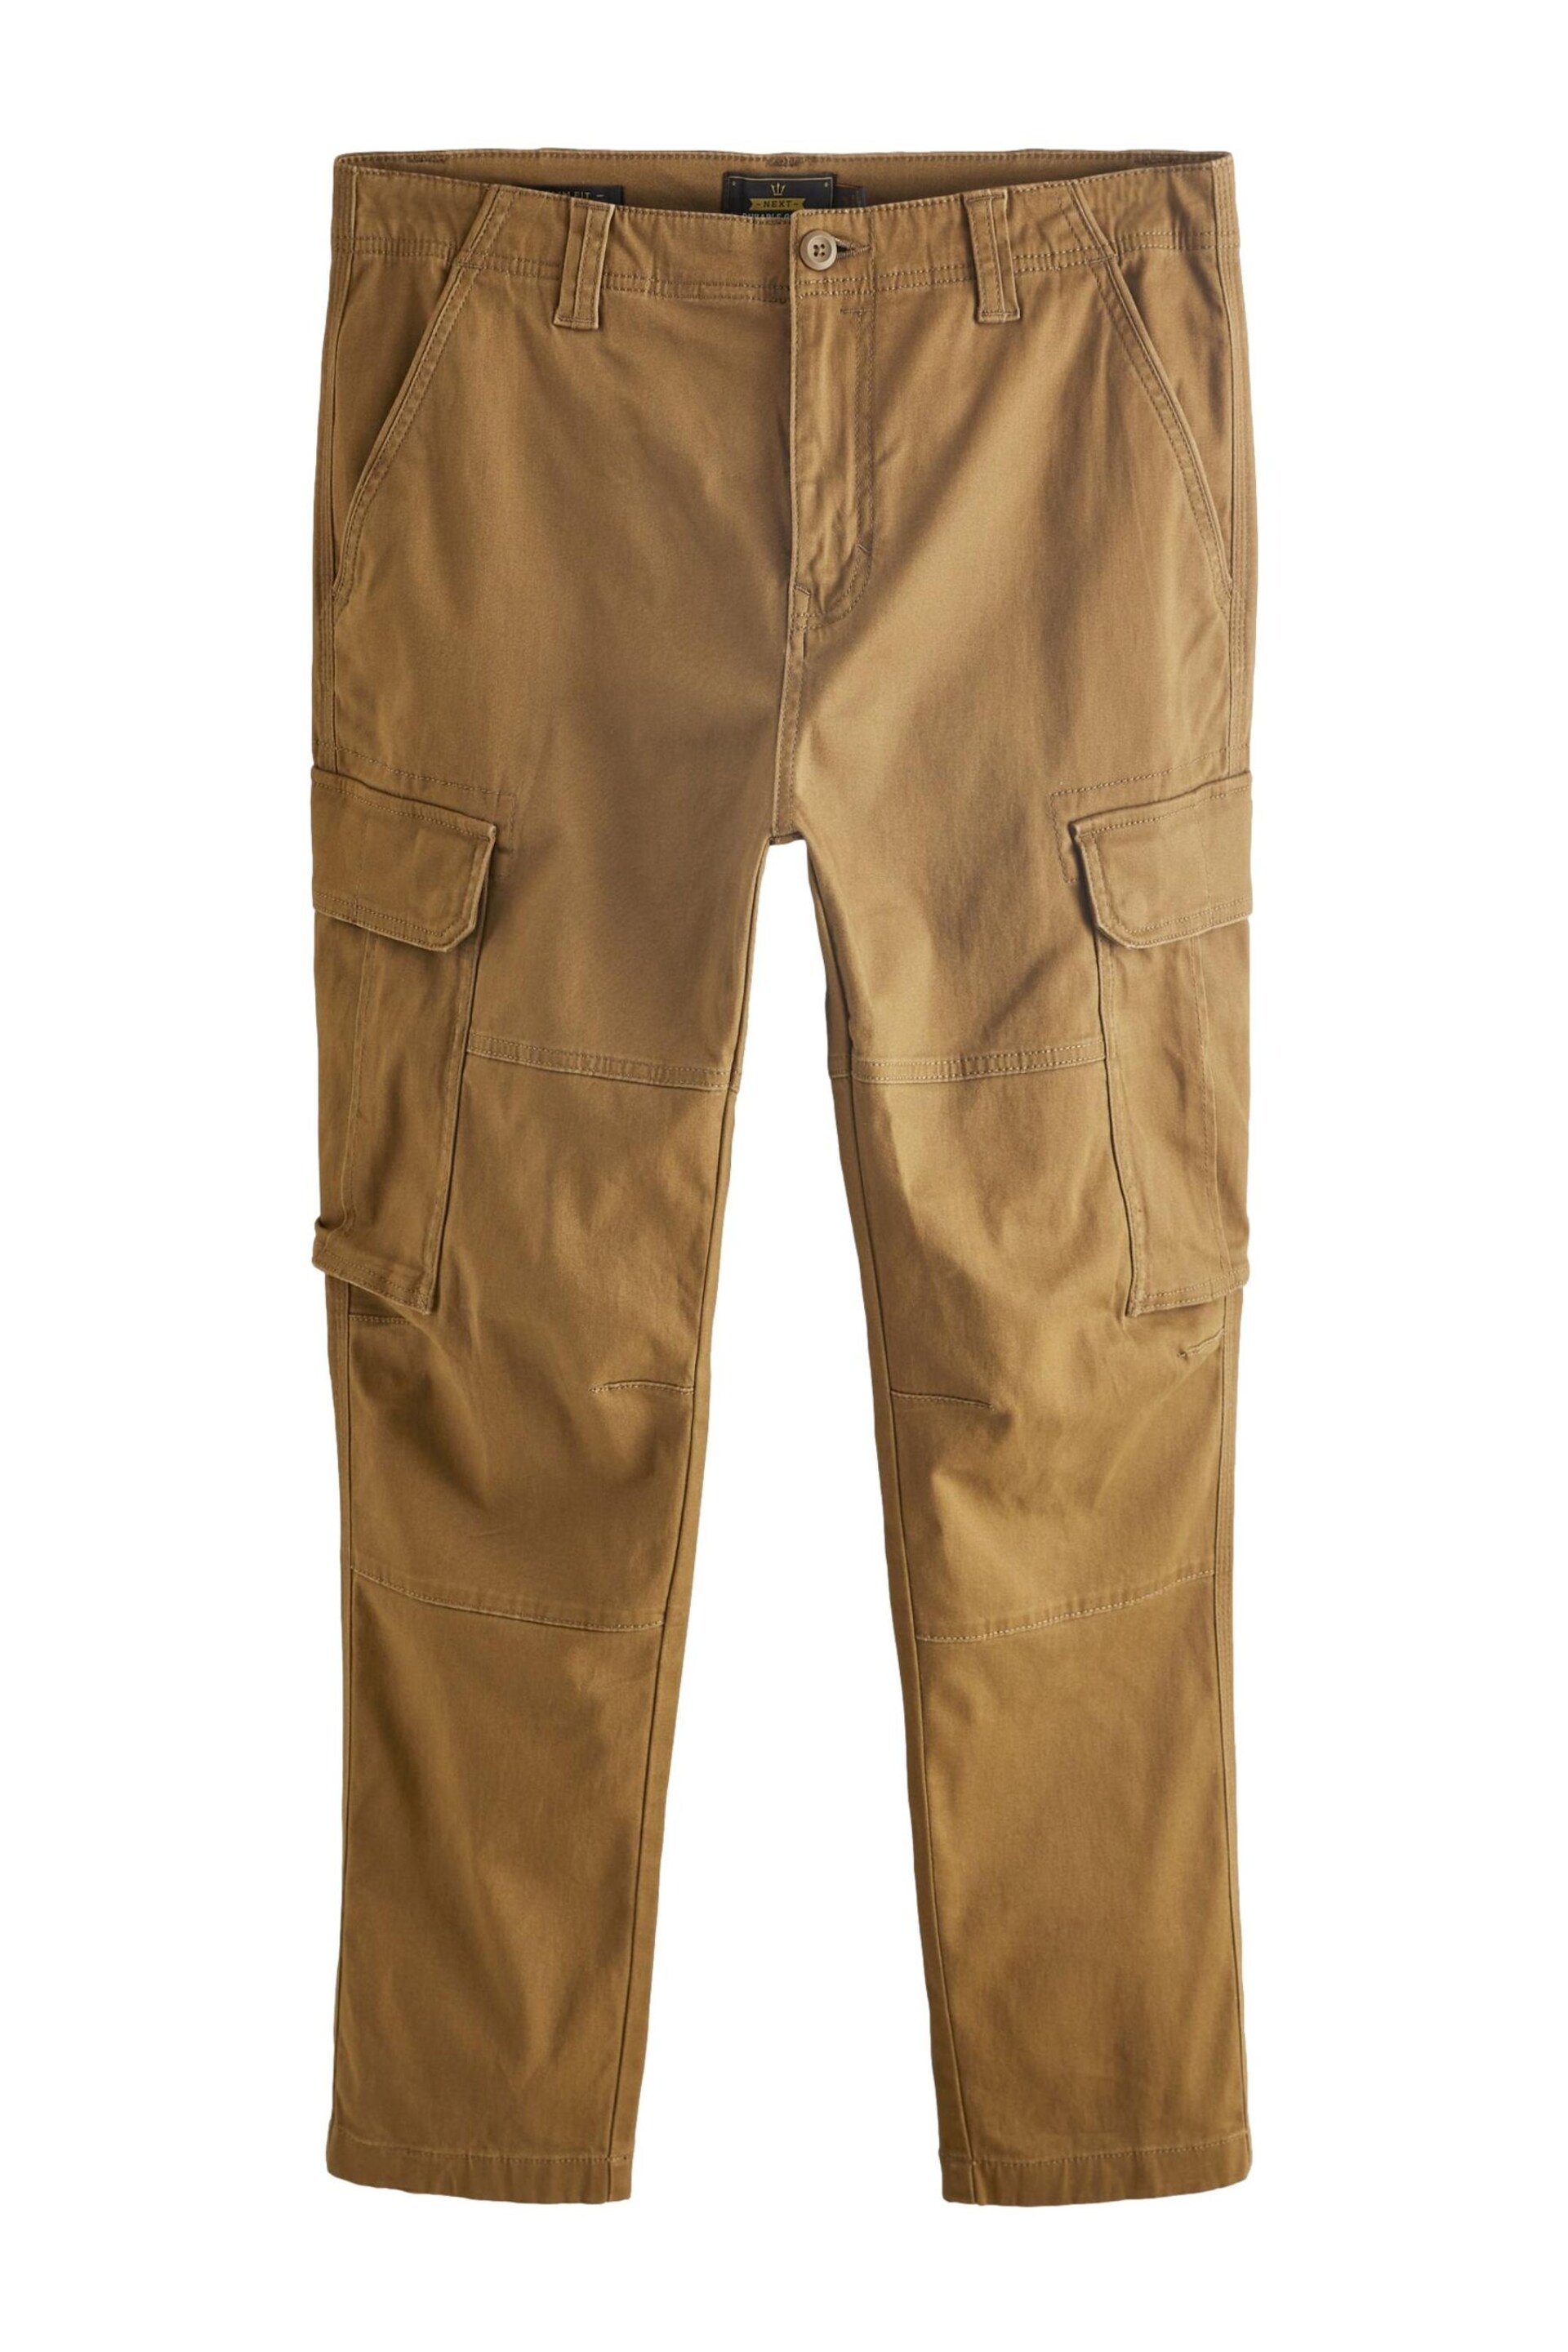 Tan Brown Slim Fit Cotton Stretch Cargo Trousers - Image 7 of 11